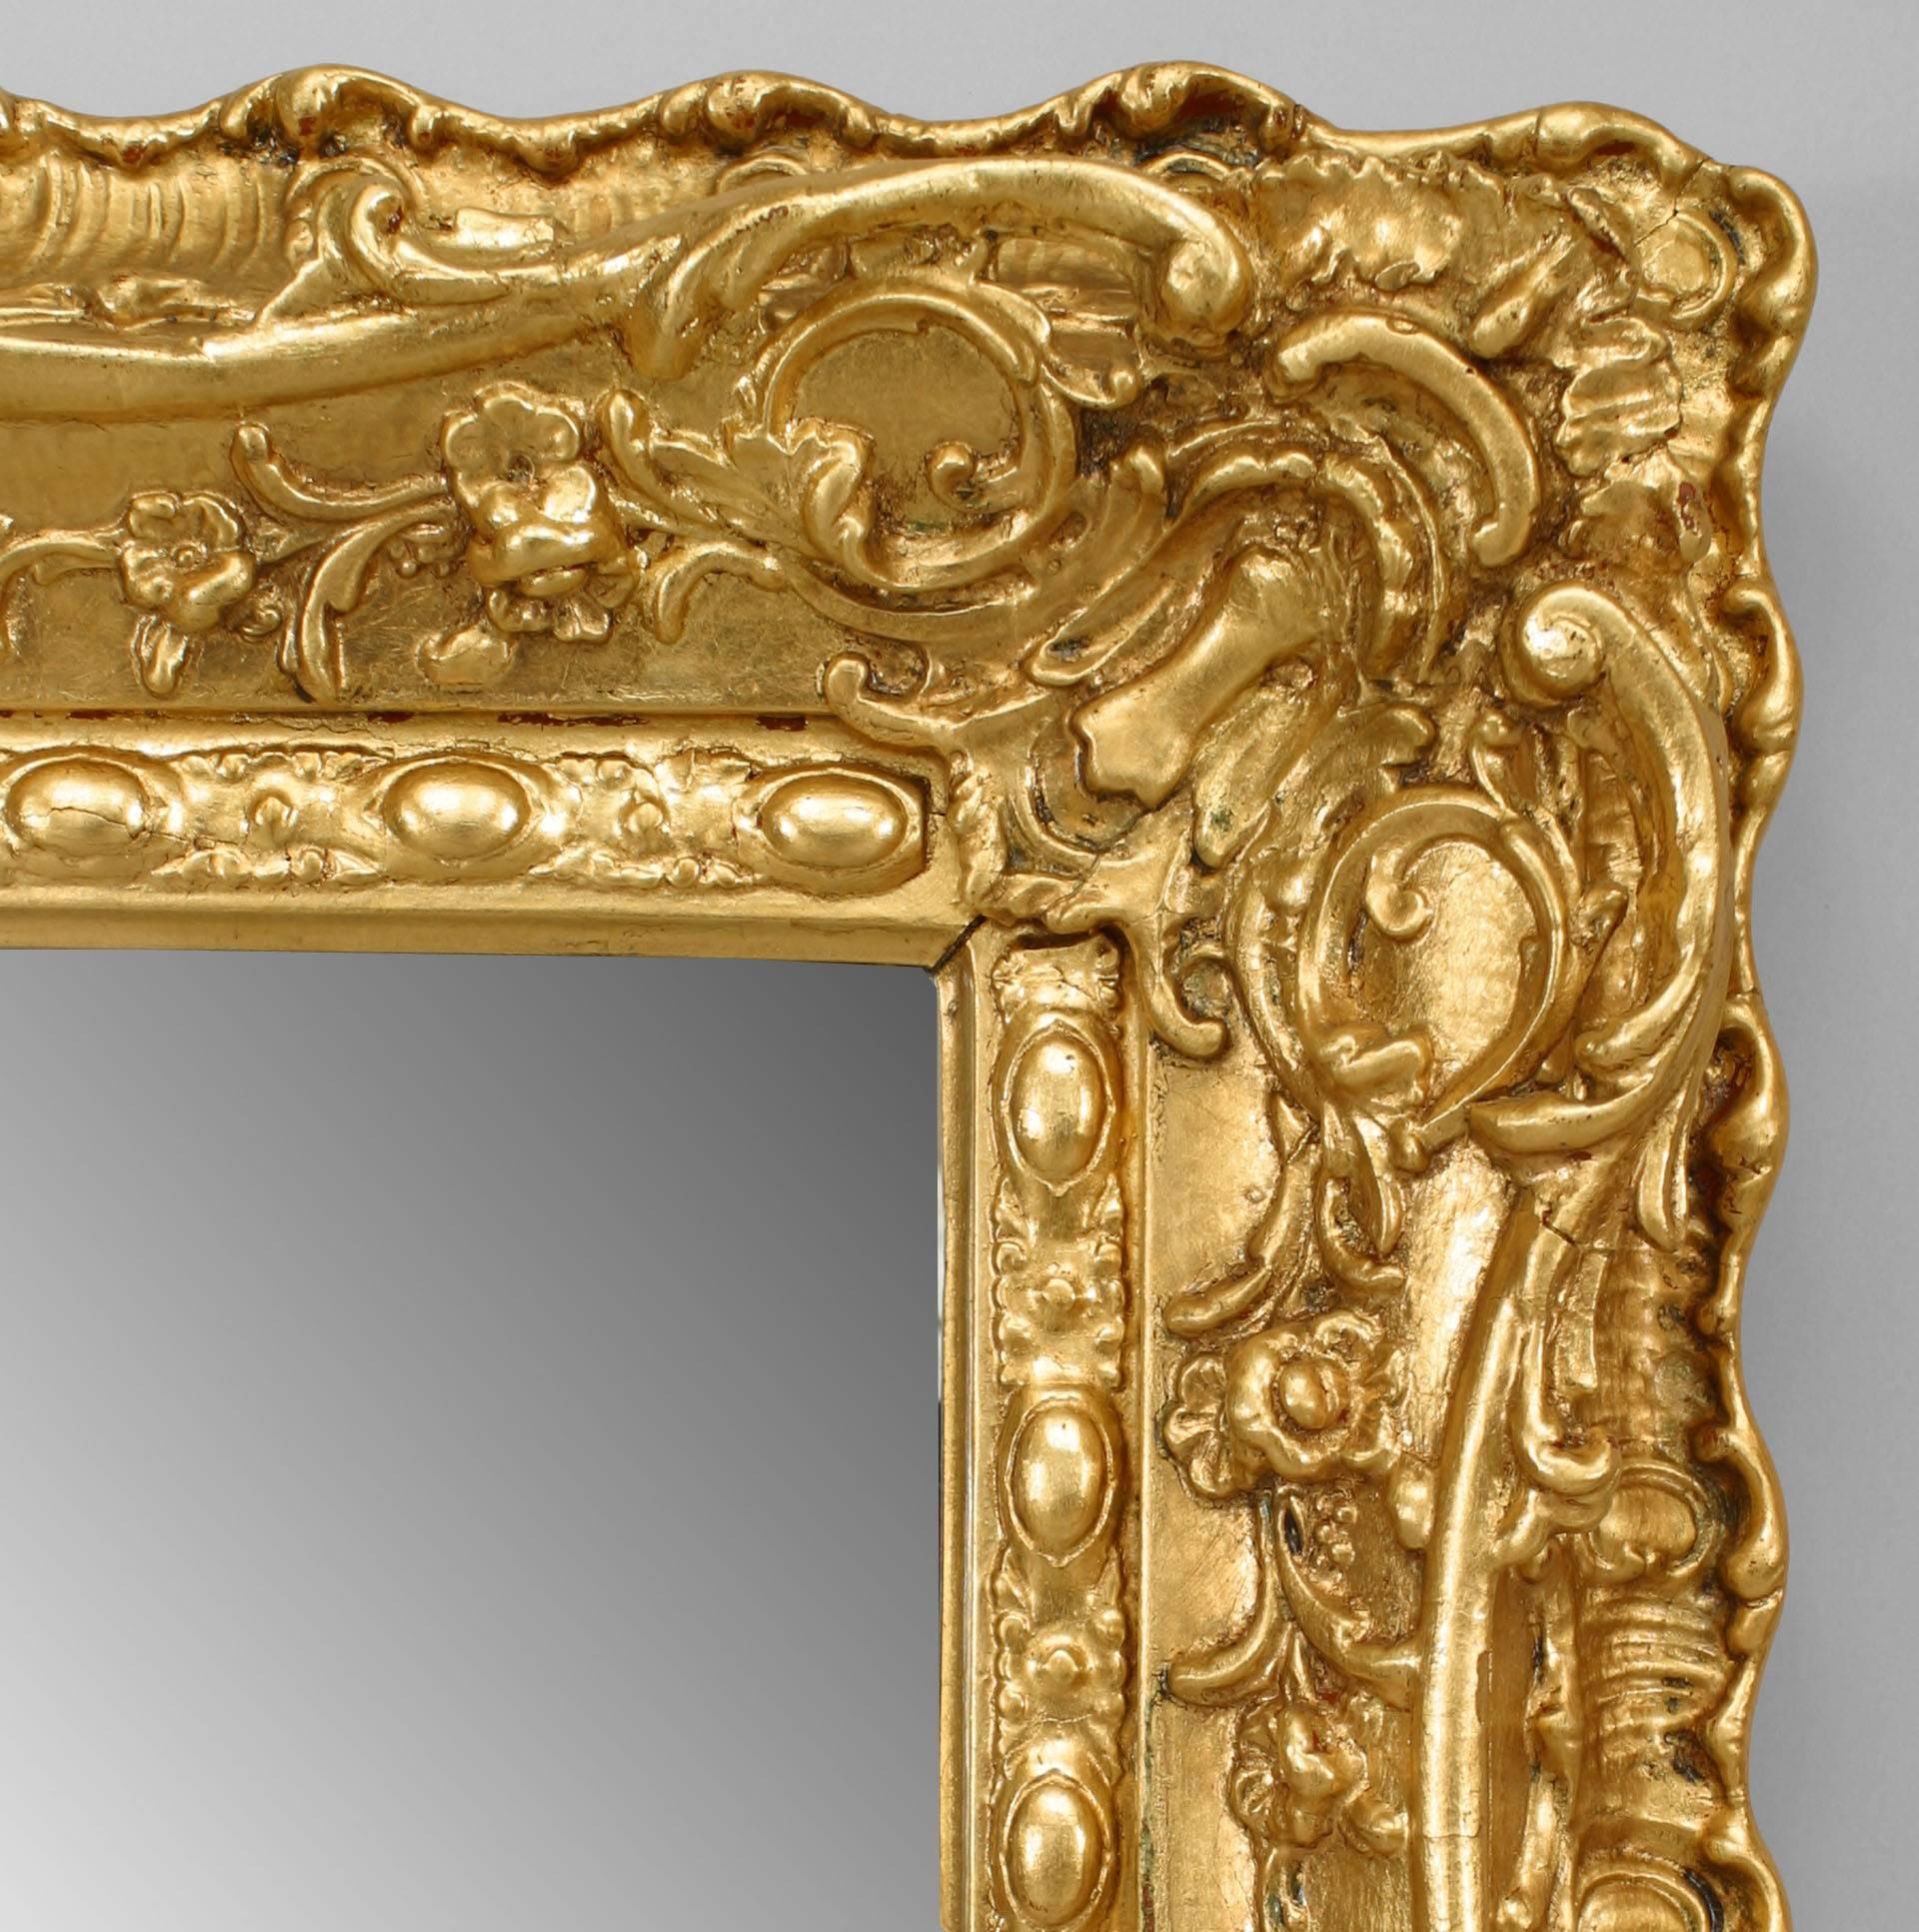 French Louis XV-style (19/20th Century) carved giltwood wall mirror with bevelled glass.
